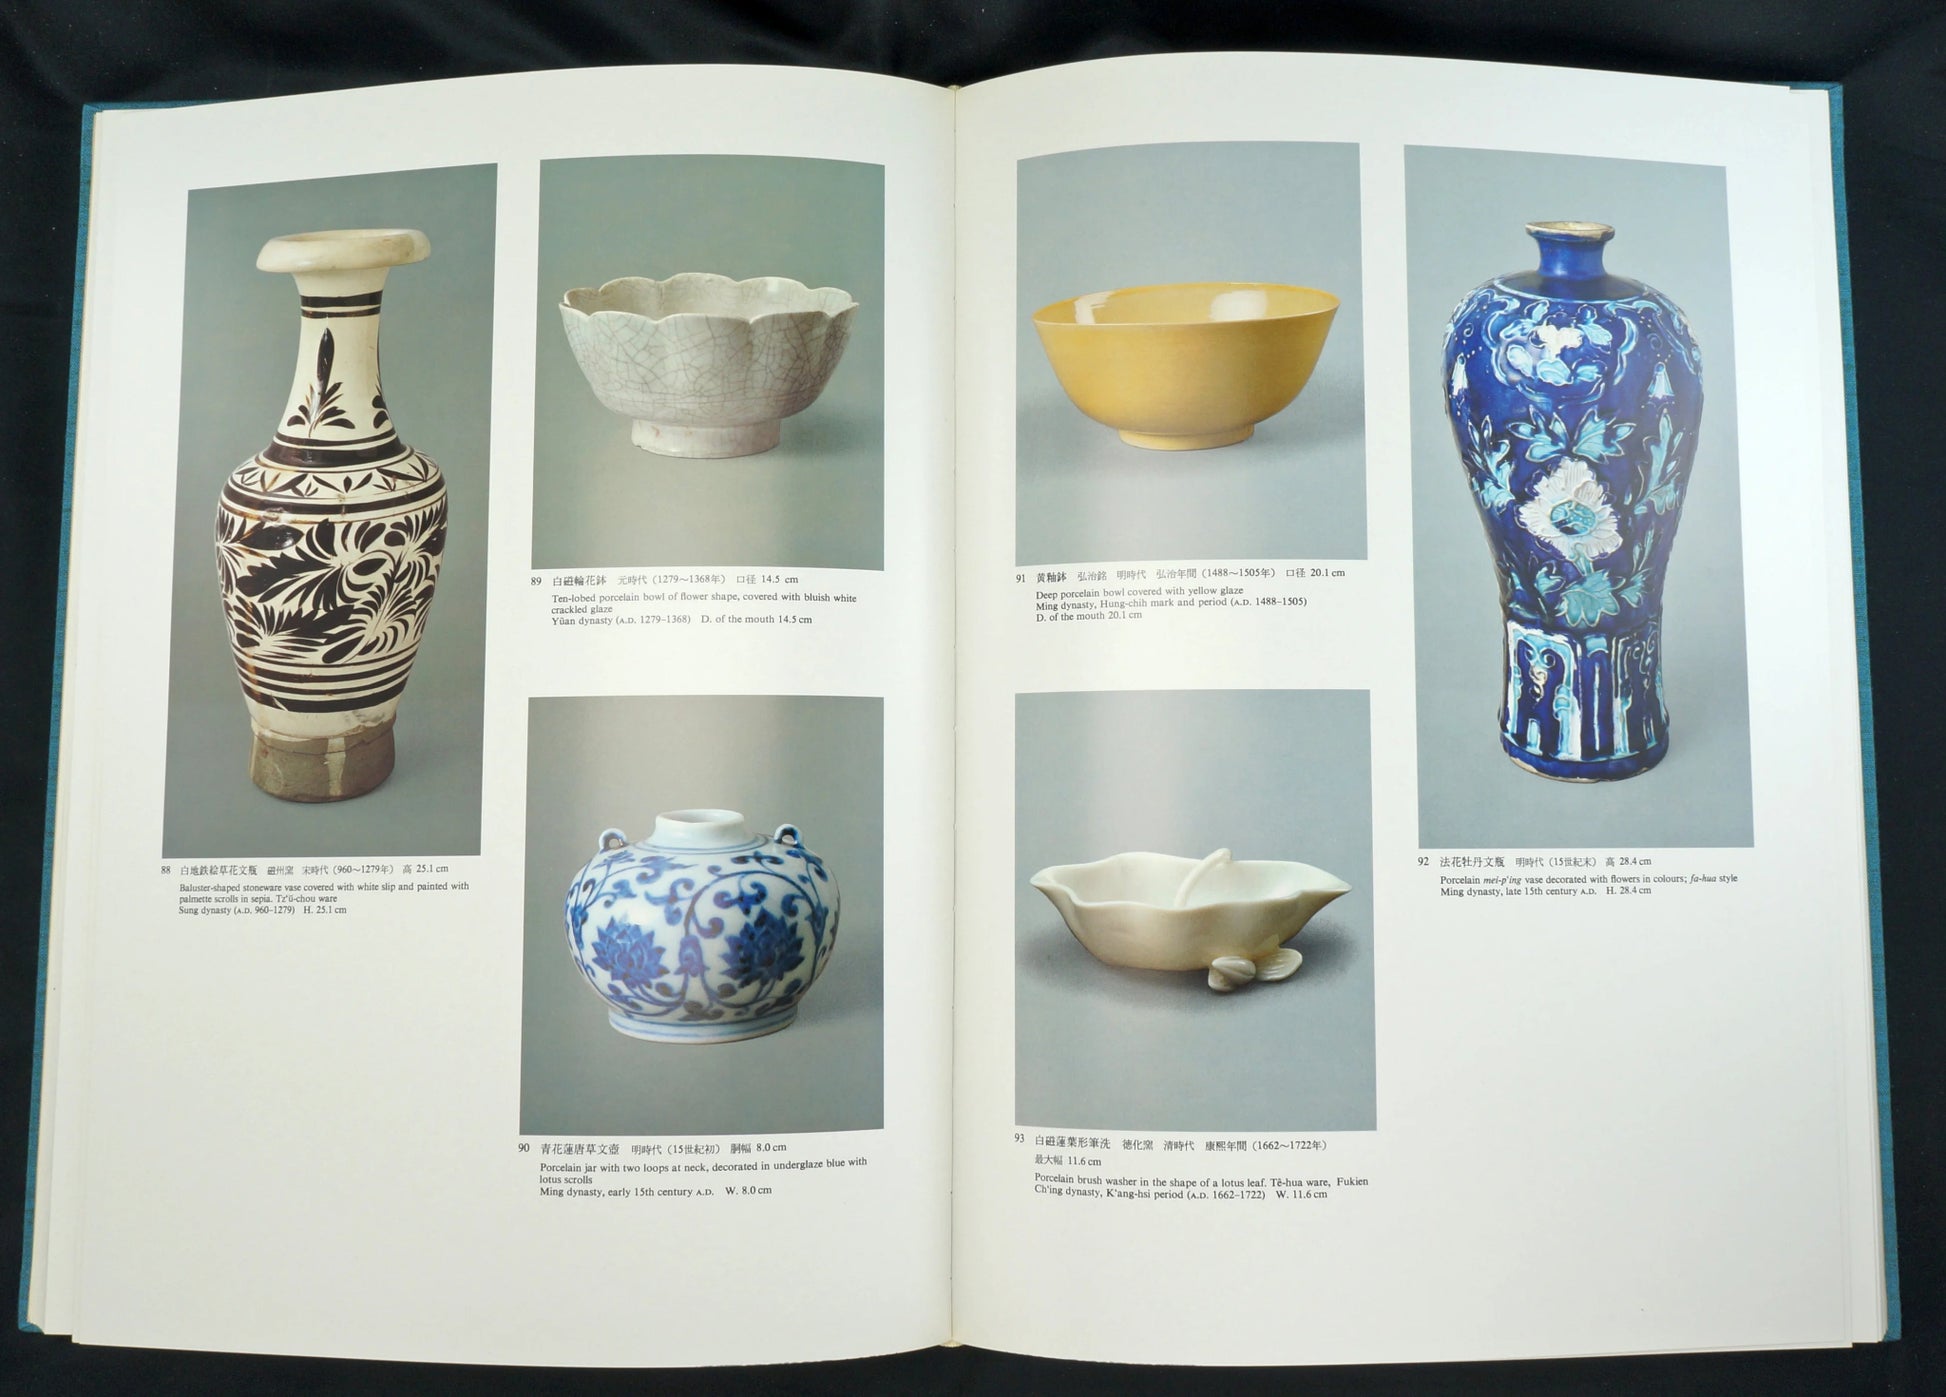 Oriental Ceramics; Worlds Great Collections-Vol. 8 - Museum of Far Eastern Antiquities Stockholm - Bear and Raven Antiques